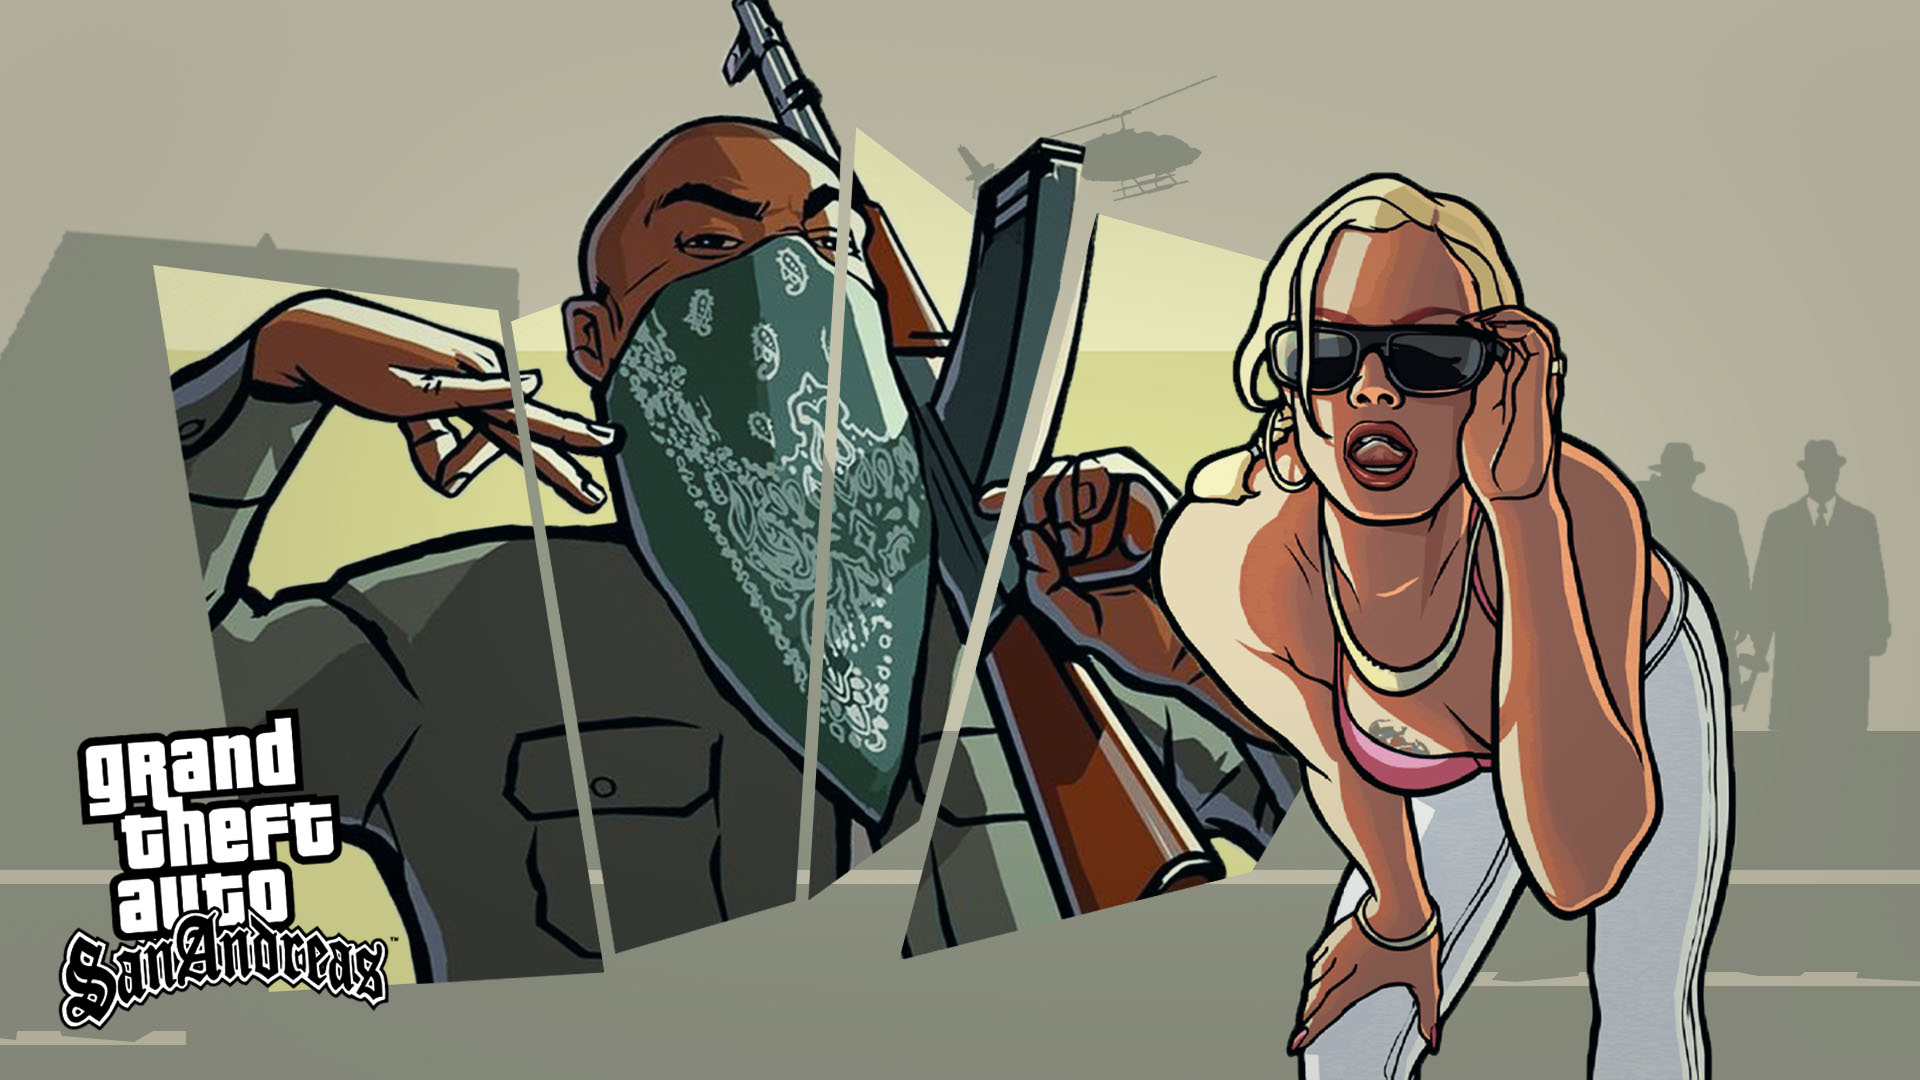 Grand Theft Auto San Andreas Wallpaper by Albanianplayer on DeviantArt